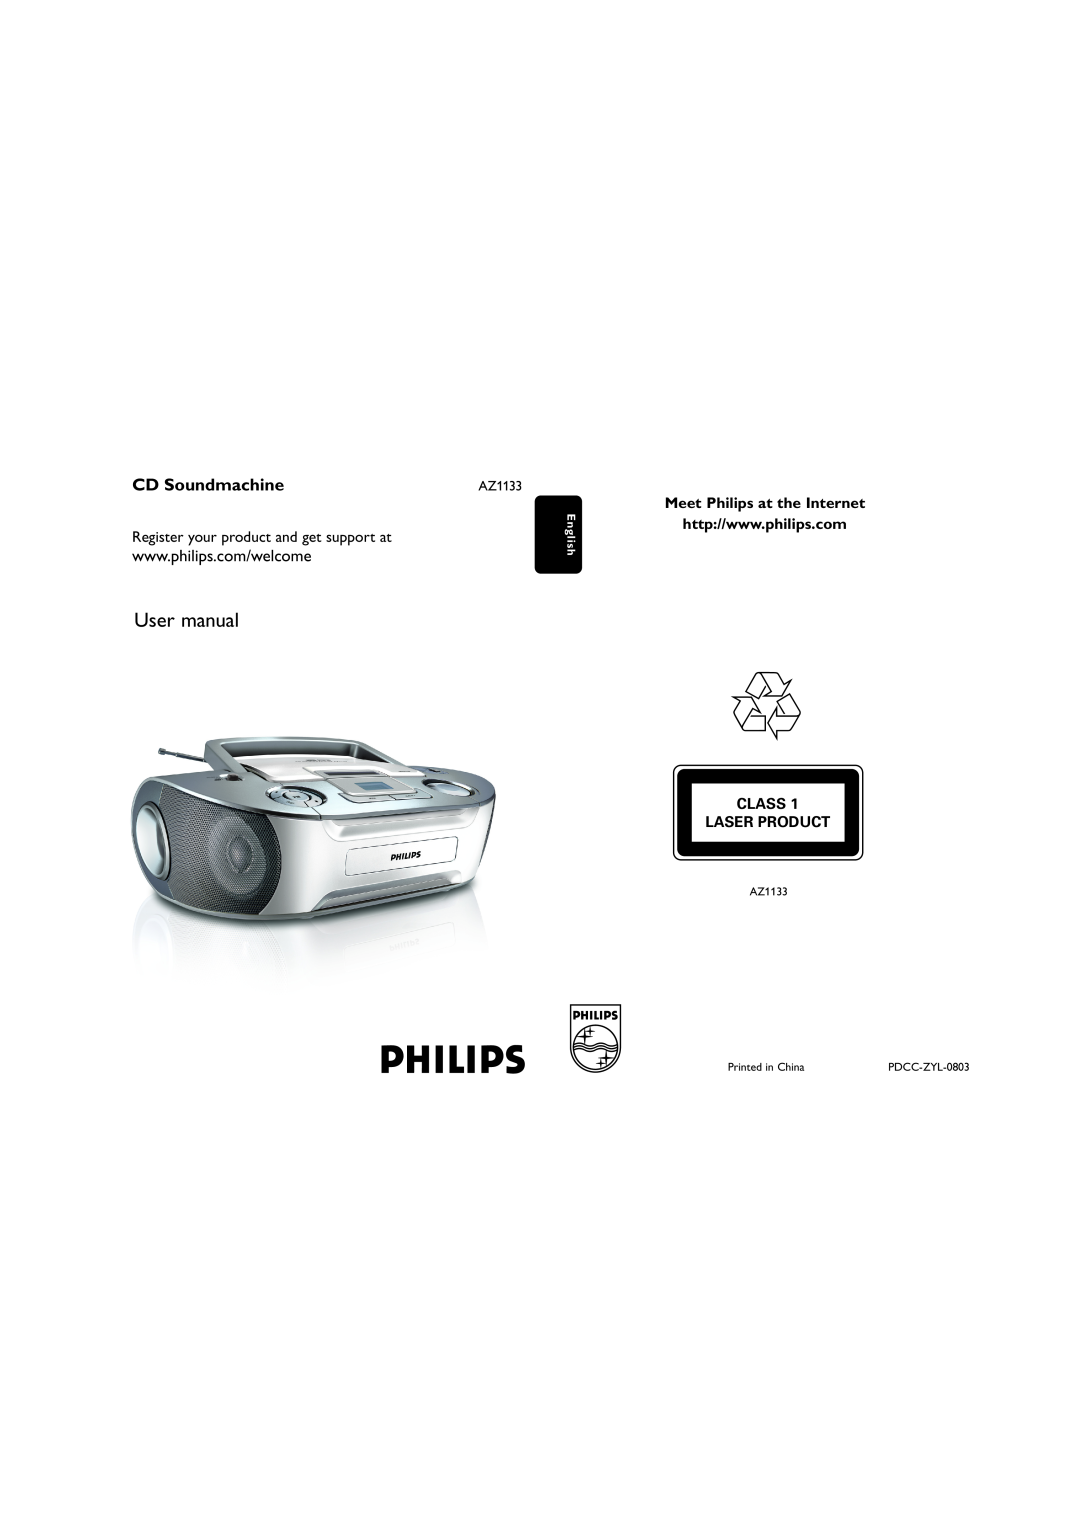 Philips AZ1133 user manual Meet Philips at the Internet, Class Laser Product, CD Soundmachine, English 